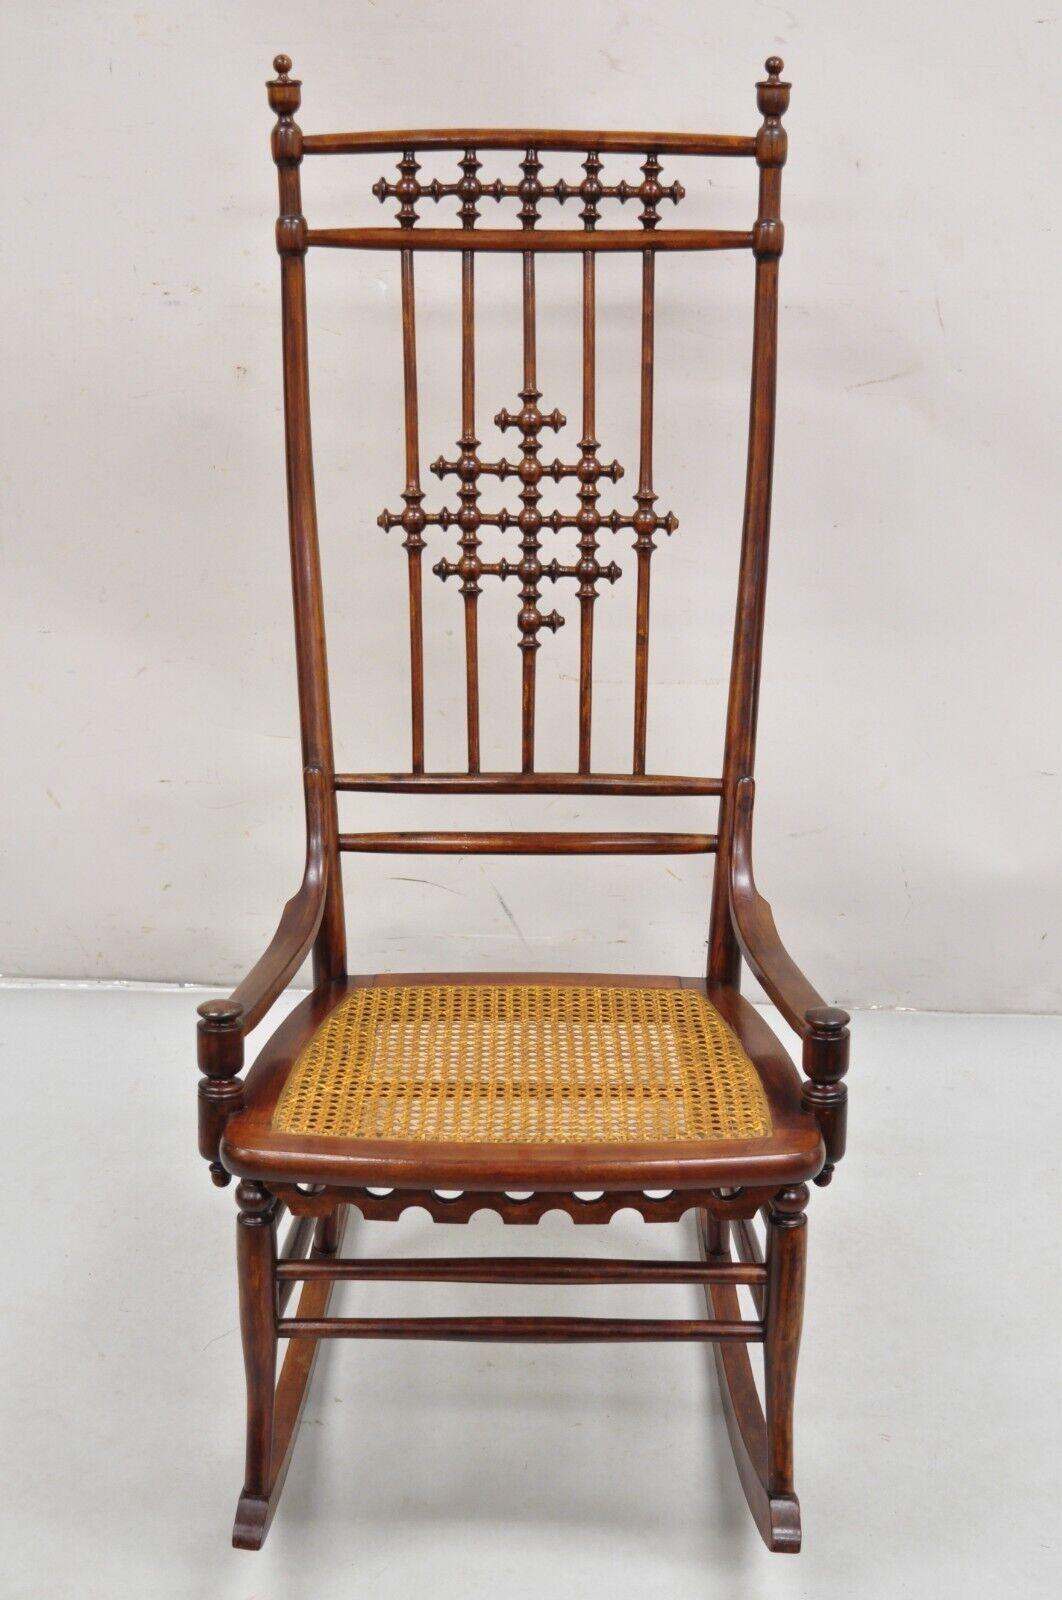 Victorian Aesthetic Movement Chestnut Stick & Ball Spindle Rocker Rocking Chair For Sale 4